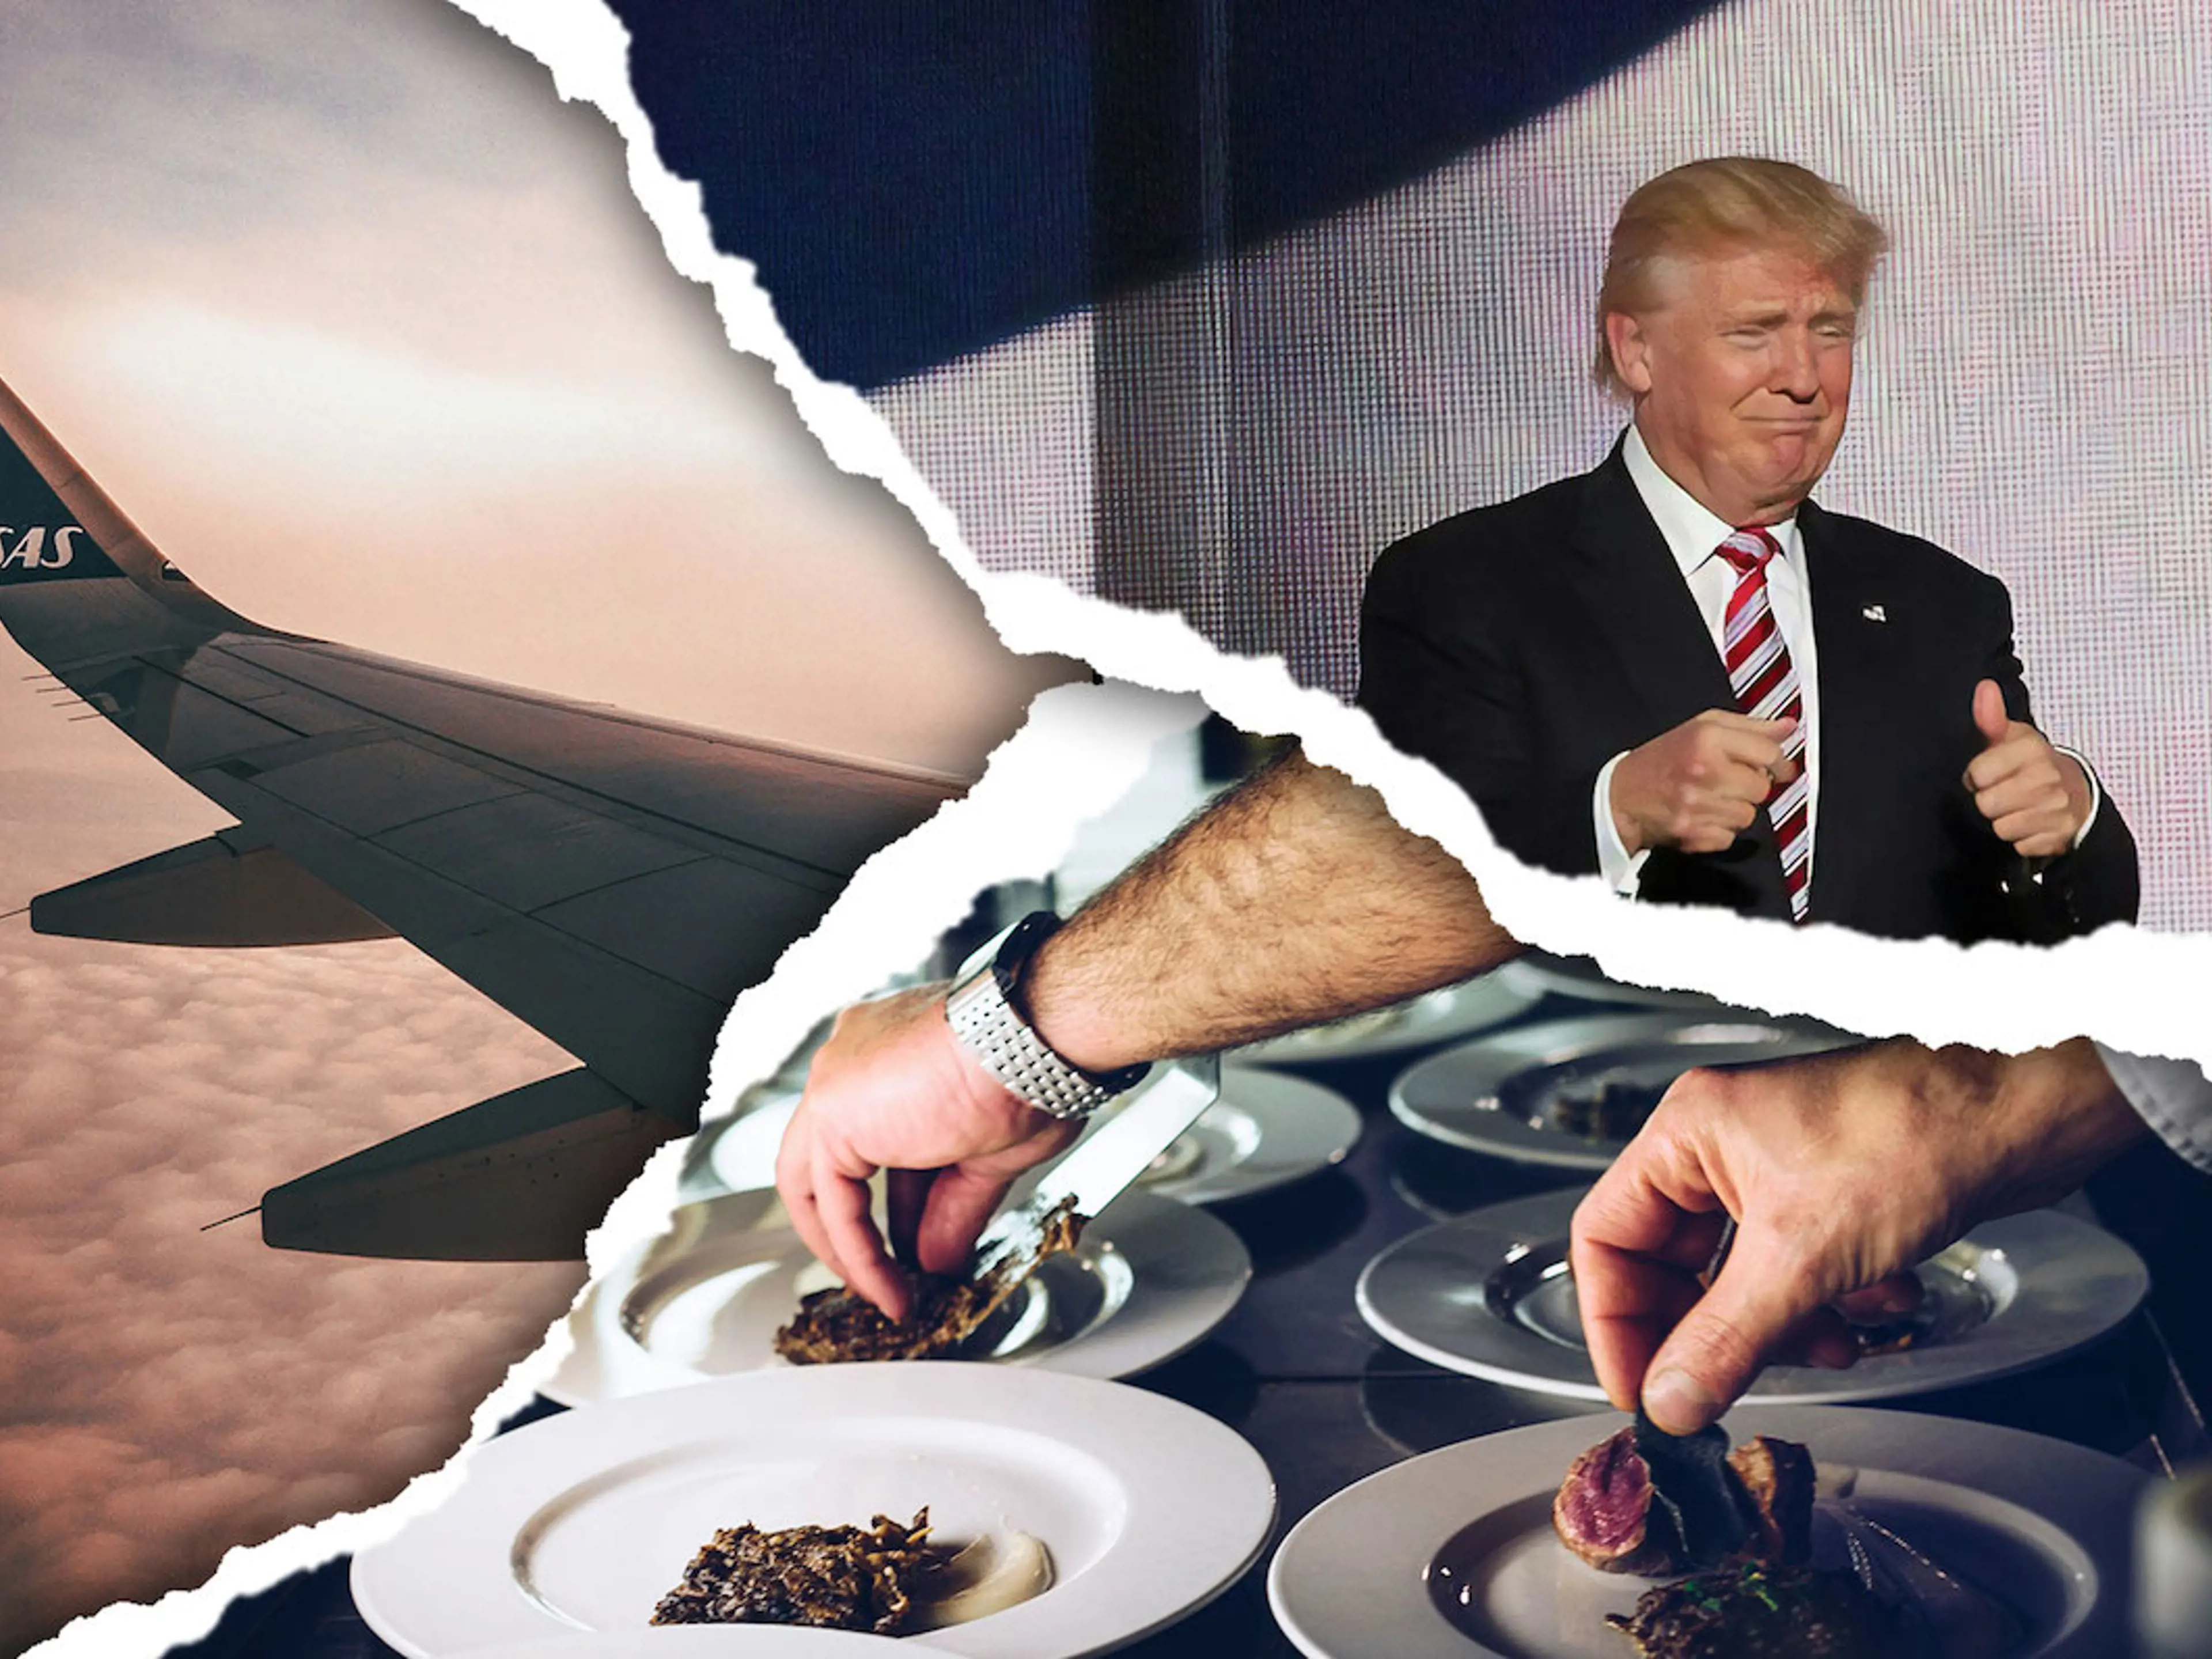 Photomontage of 3 pictures: Donald Trump with his thumbs up, a view from an SAS plane in flight, and several plates with 2 hands that are seen placing and presenting food on them 